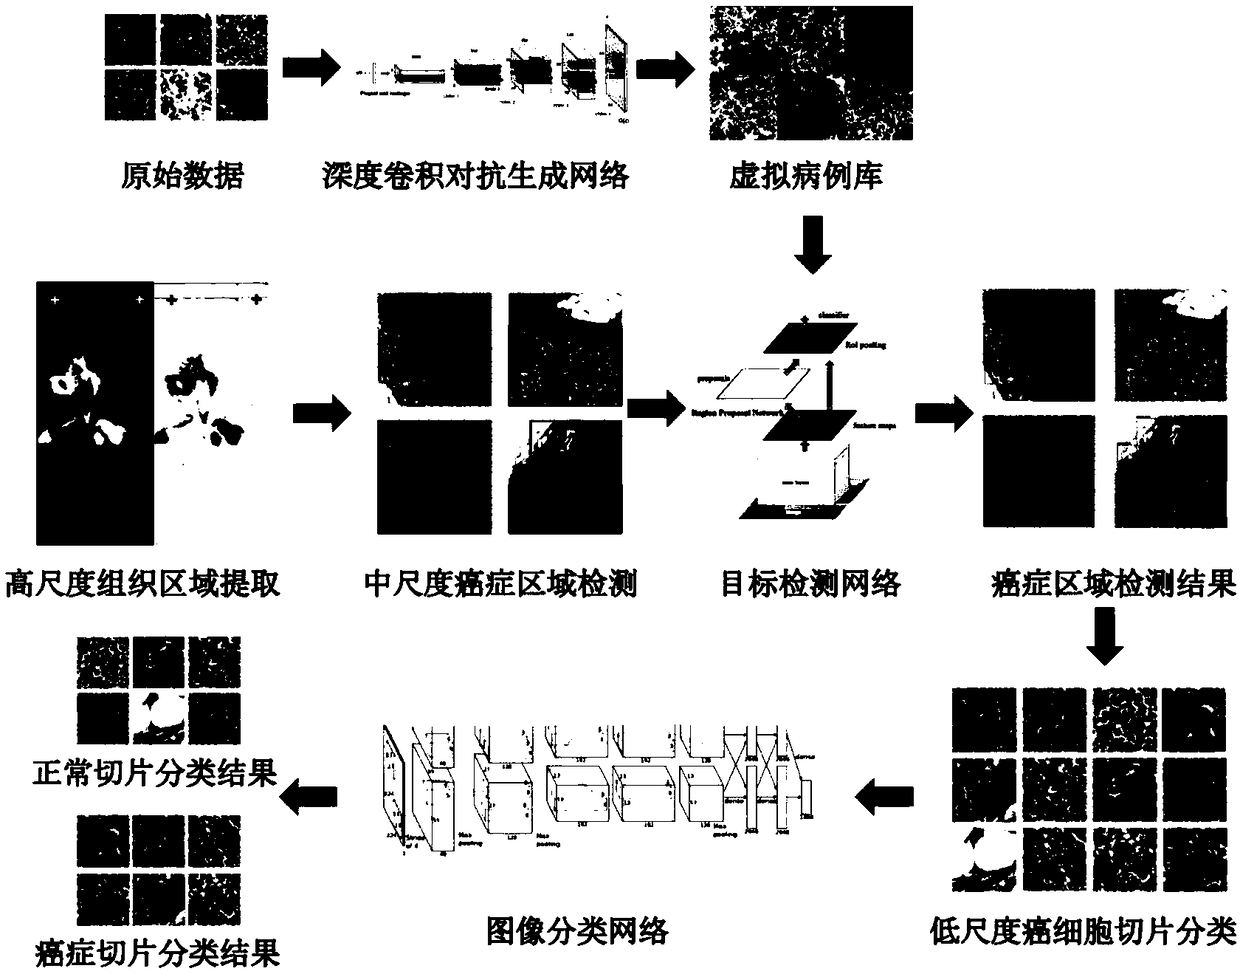 Method for constructing virtual case library of cancer pathological images and multi-scale cancer detection system based on convolutional neural network